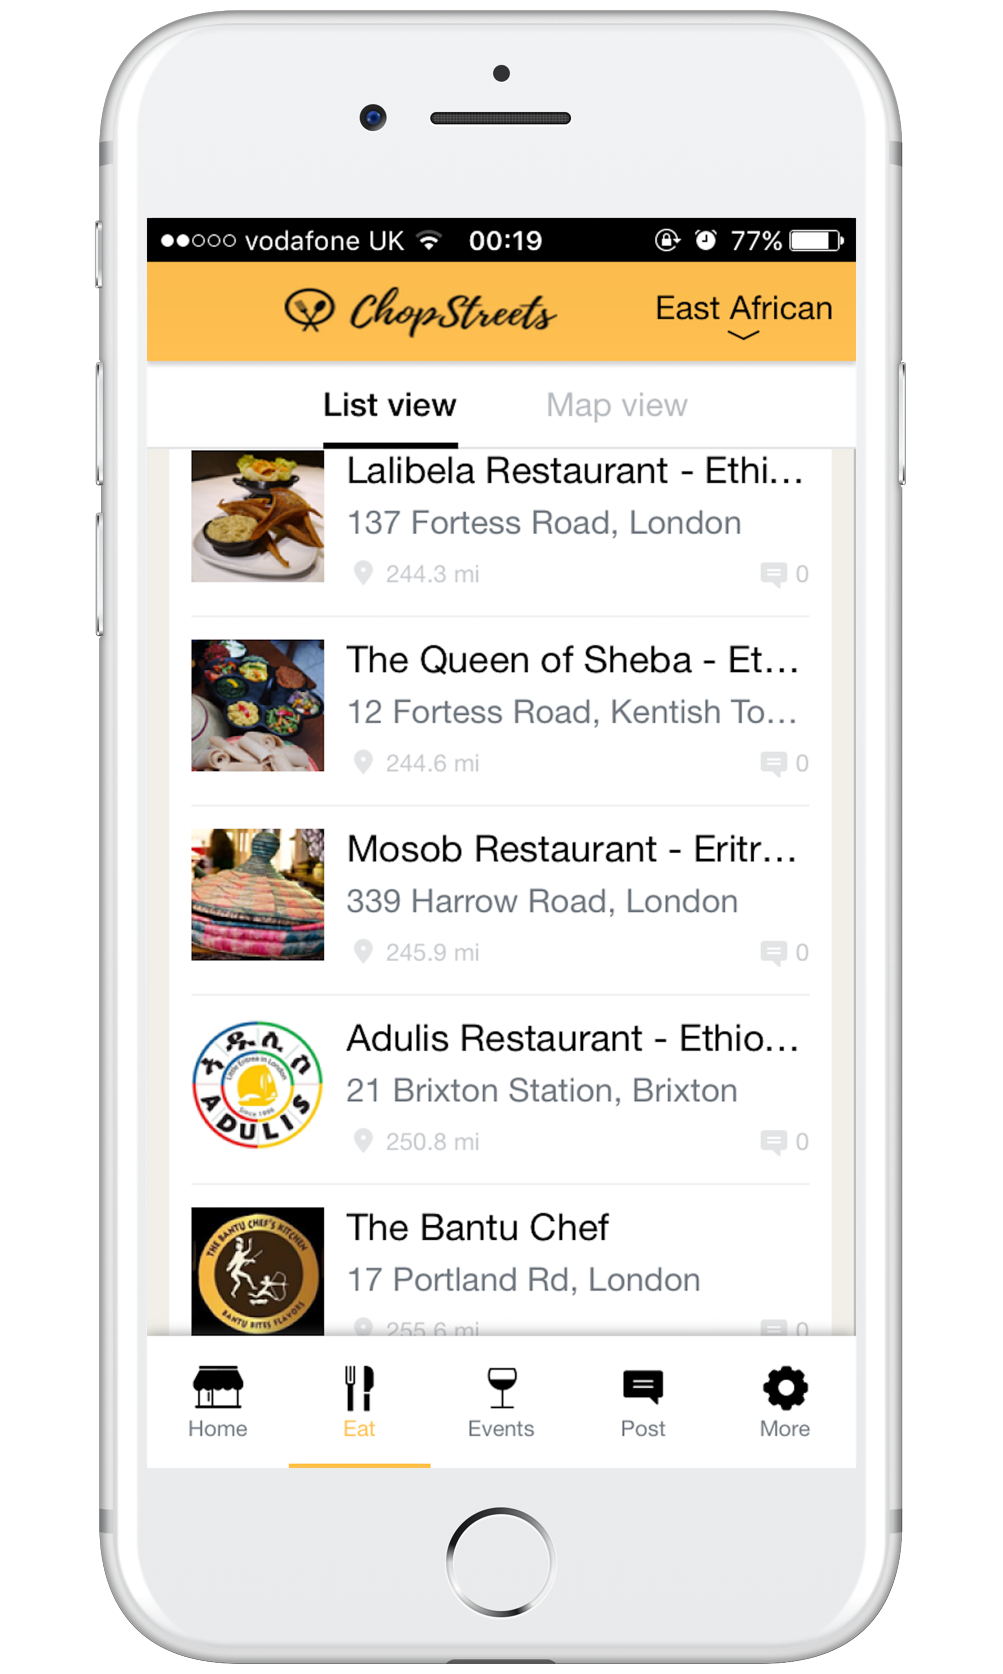 Chopstreets: a new app for African and Caribbean food